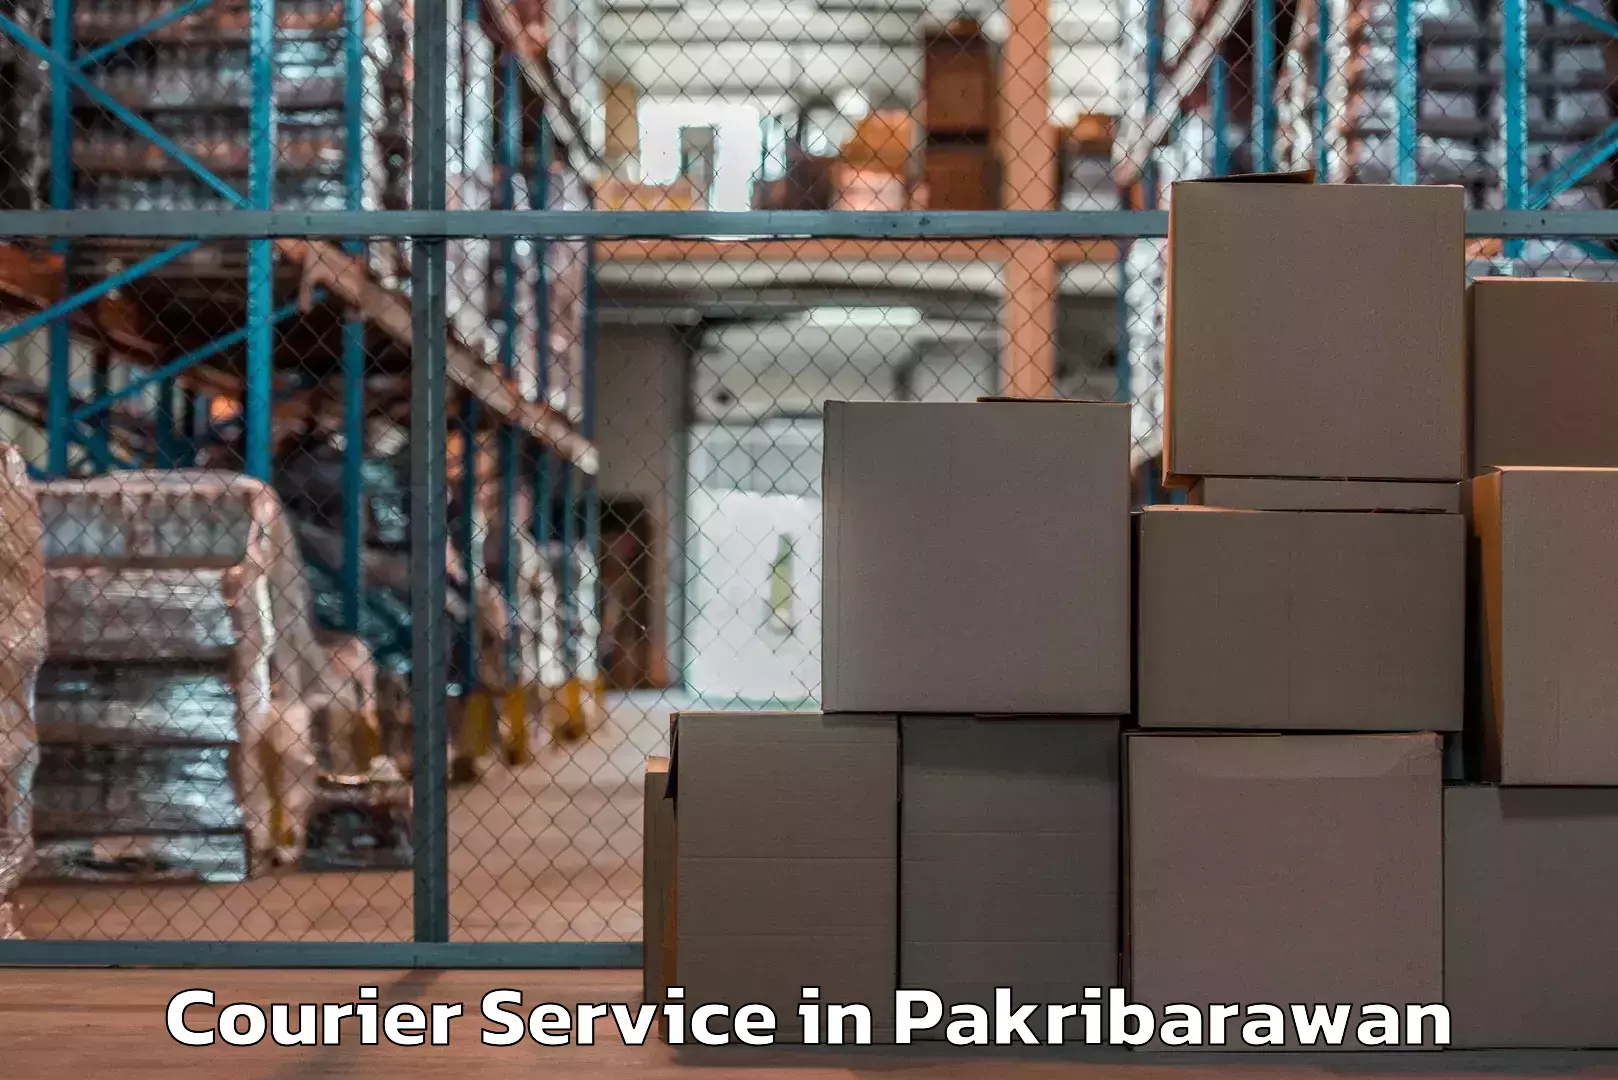 Personalized courier experiences in Pakribarawan